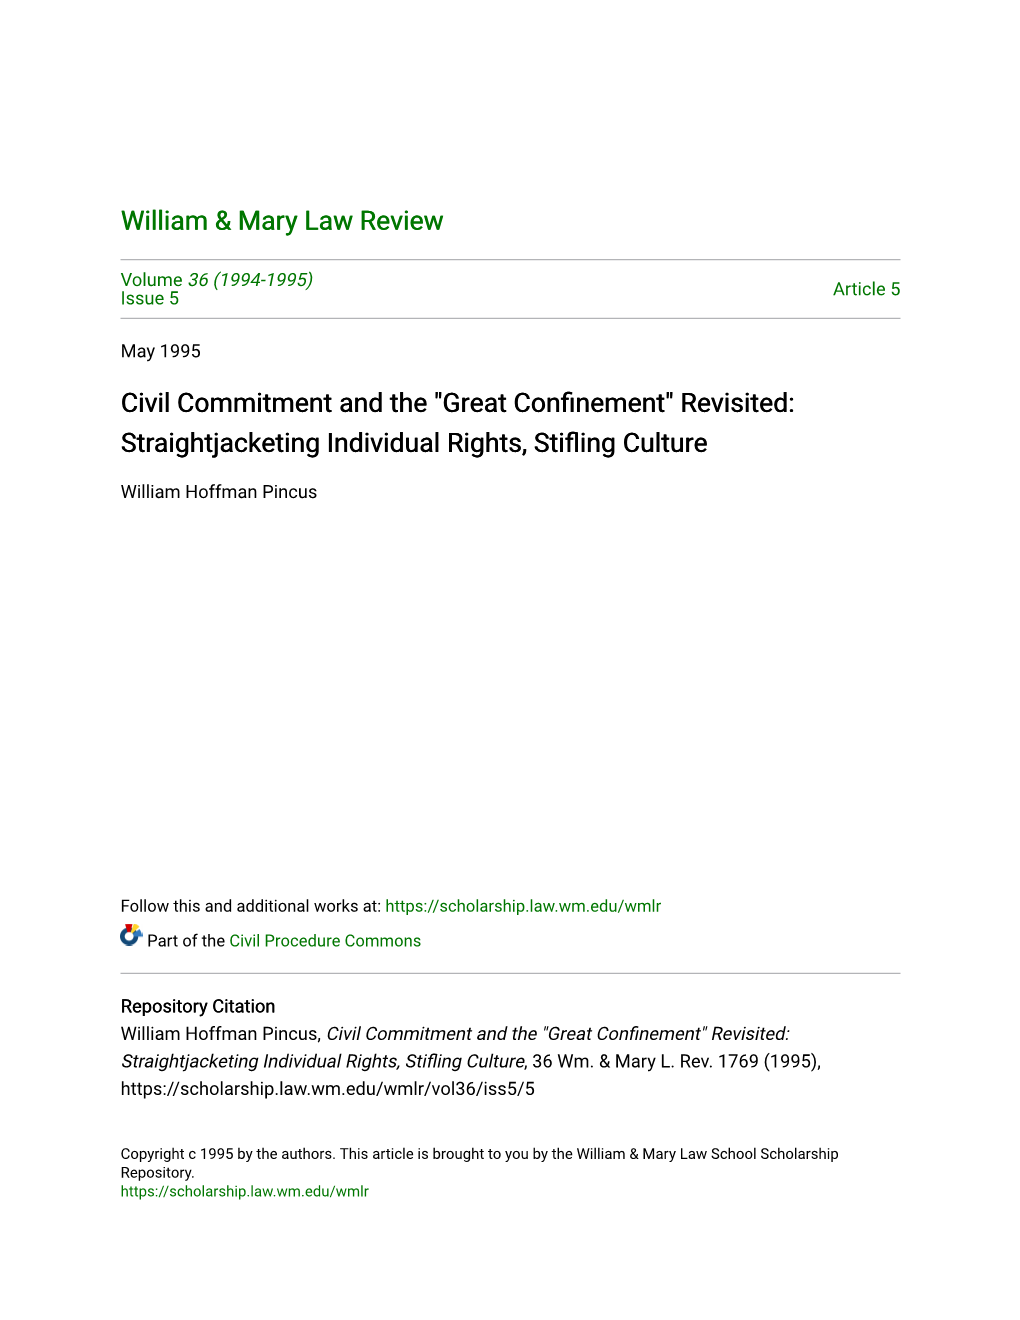 Civil Commitment and the "Great Confinement" Revisited: Straightjacketing Individual Rights, Stifling Culture